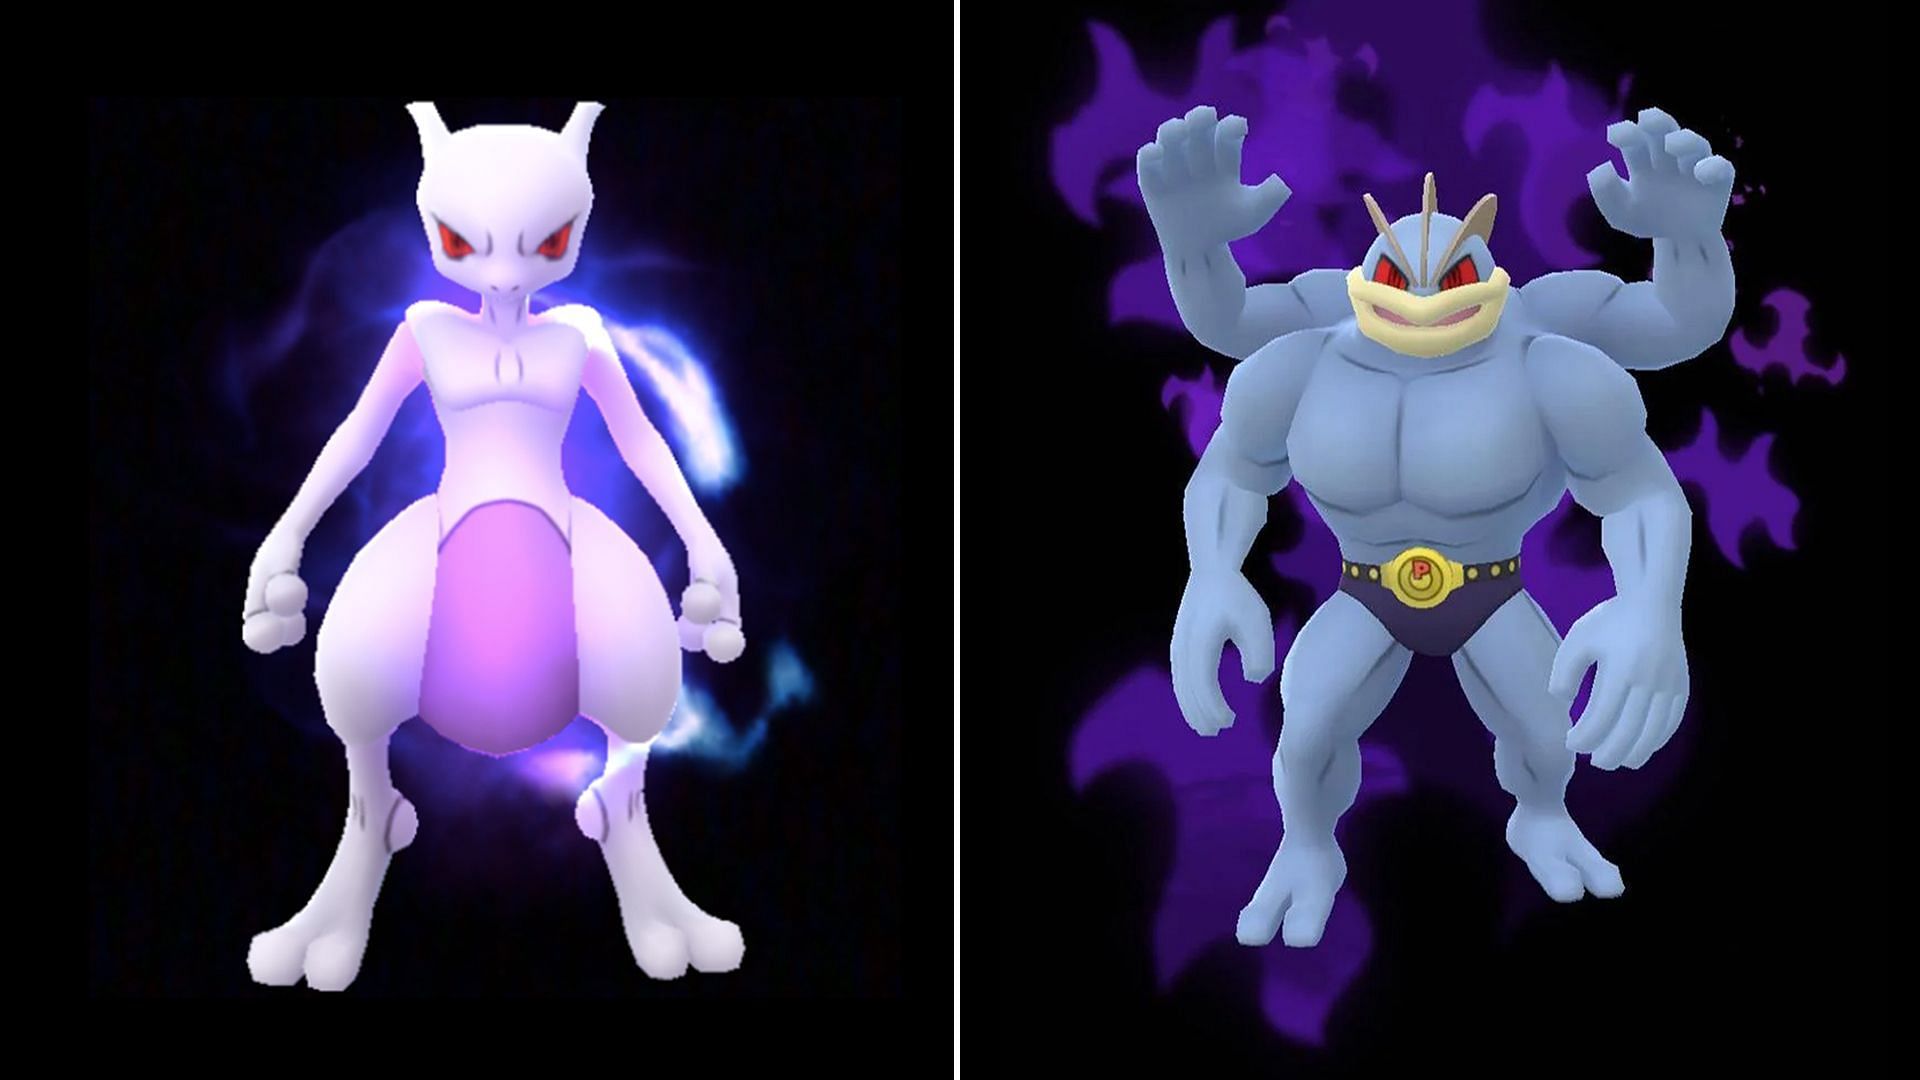 Shadow Mewtwo (Pokémon GO): Stats, Moves, Counters, Evolution